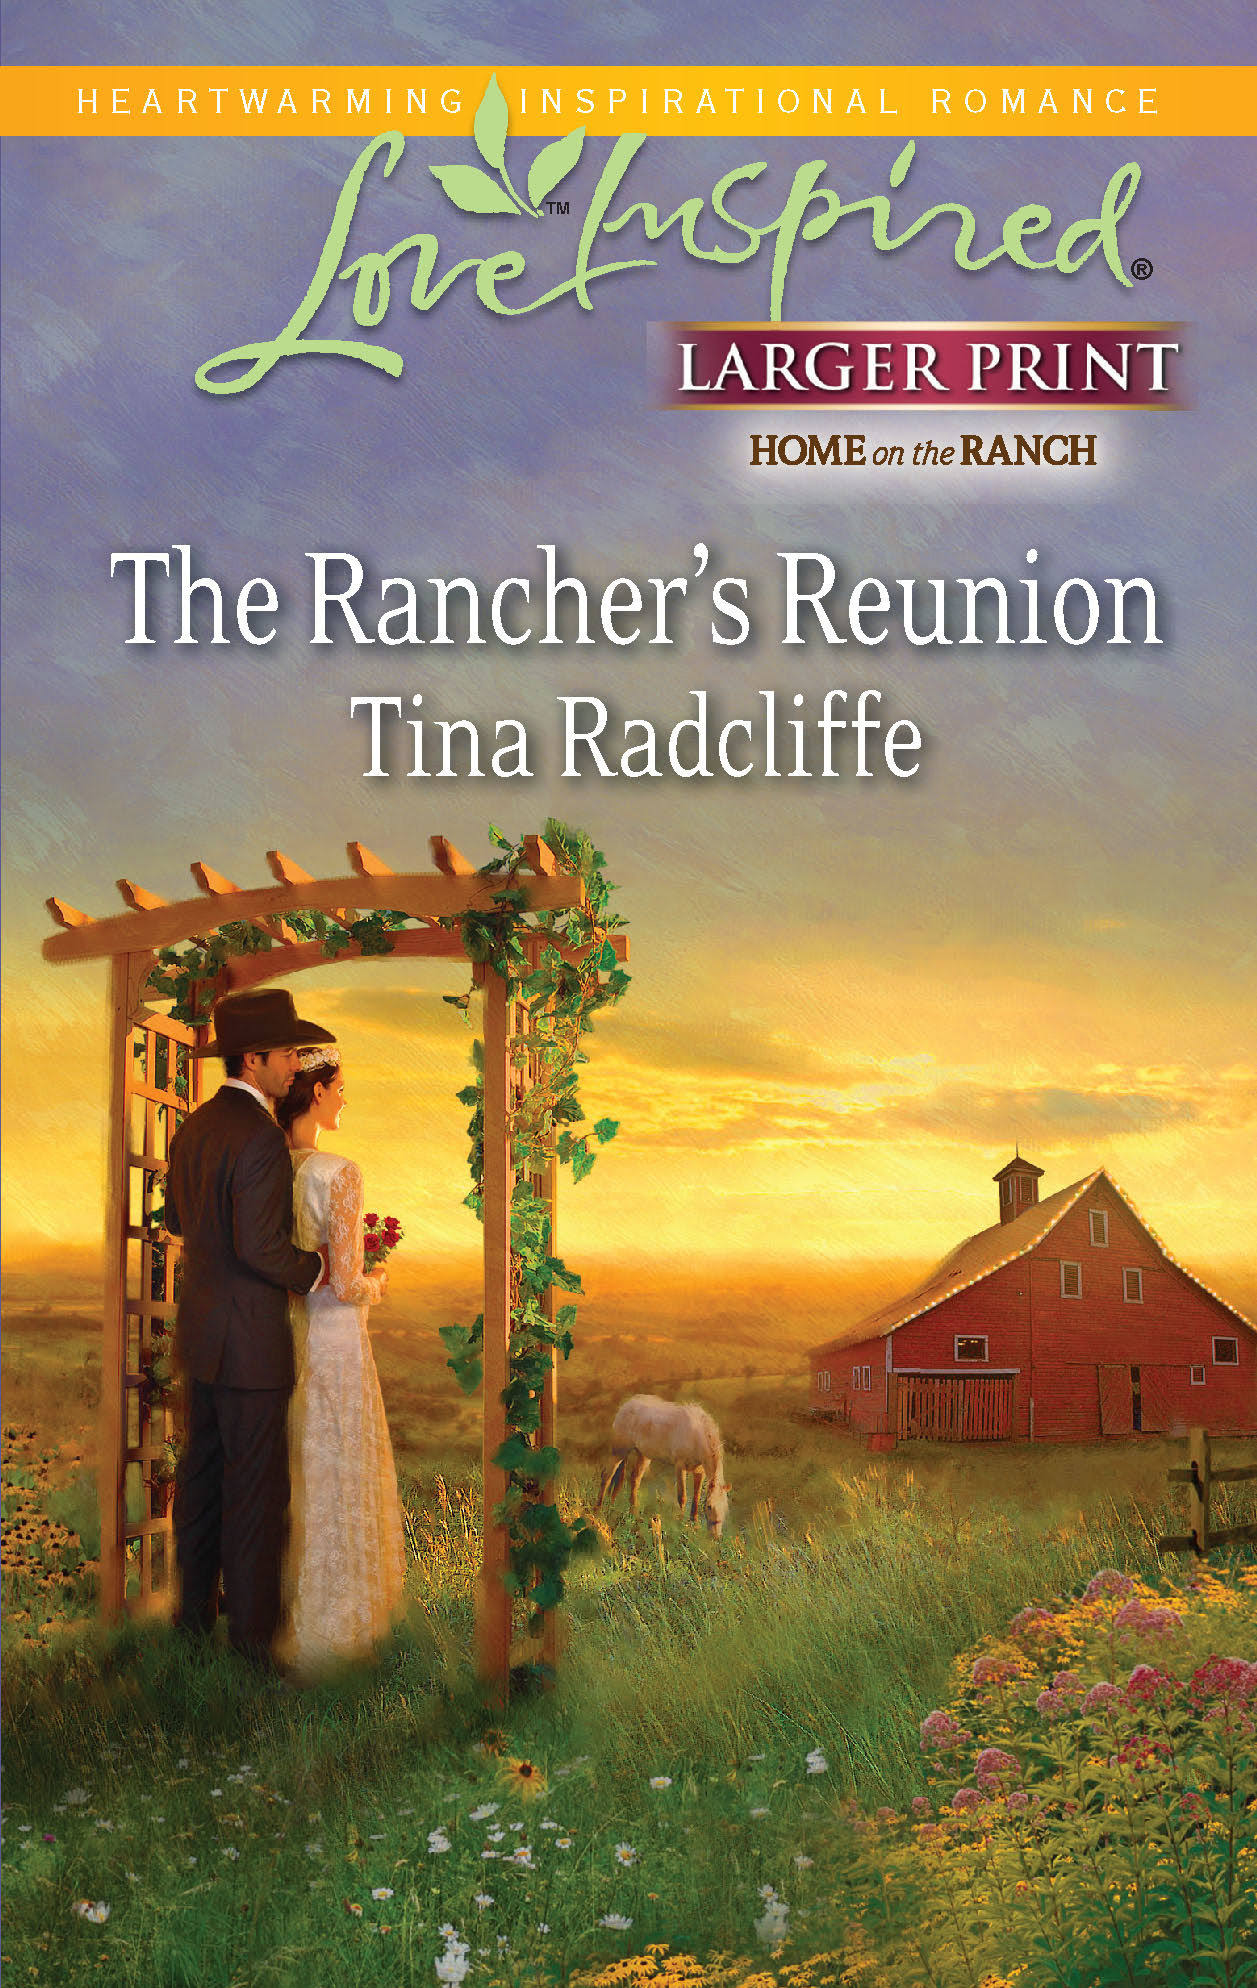 The Rancher's Reunion [Book]